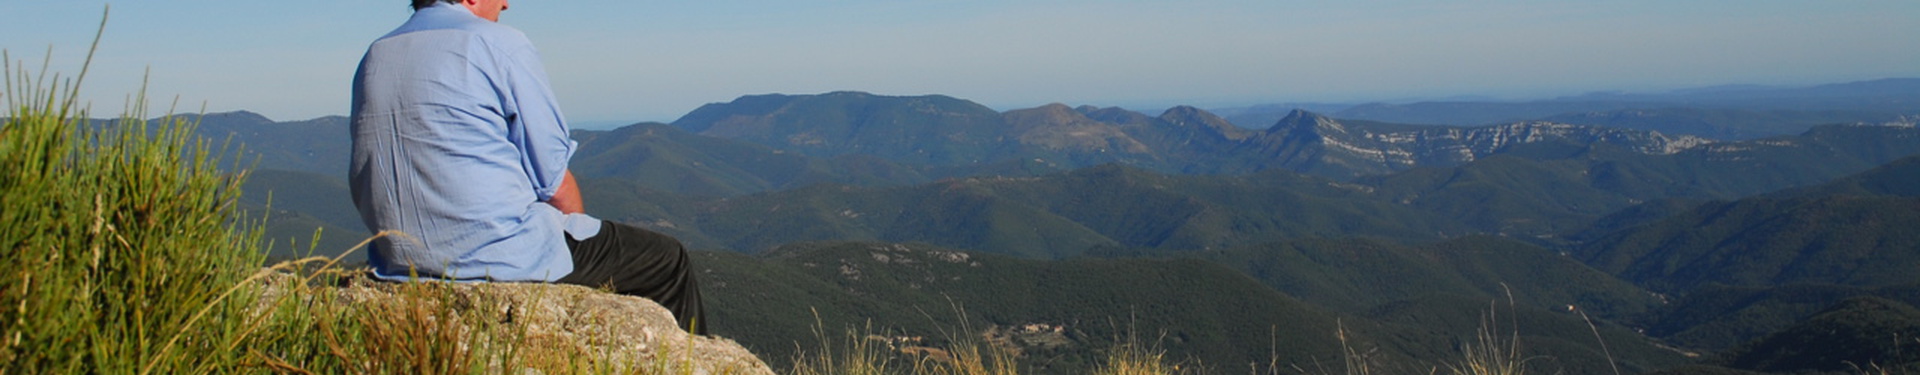 Self Guided hiking tour in the Cévennes, South of France